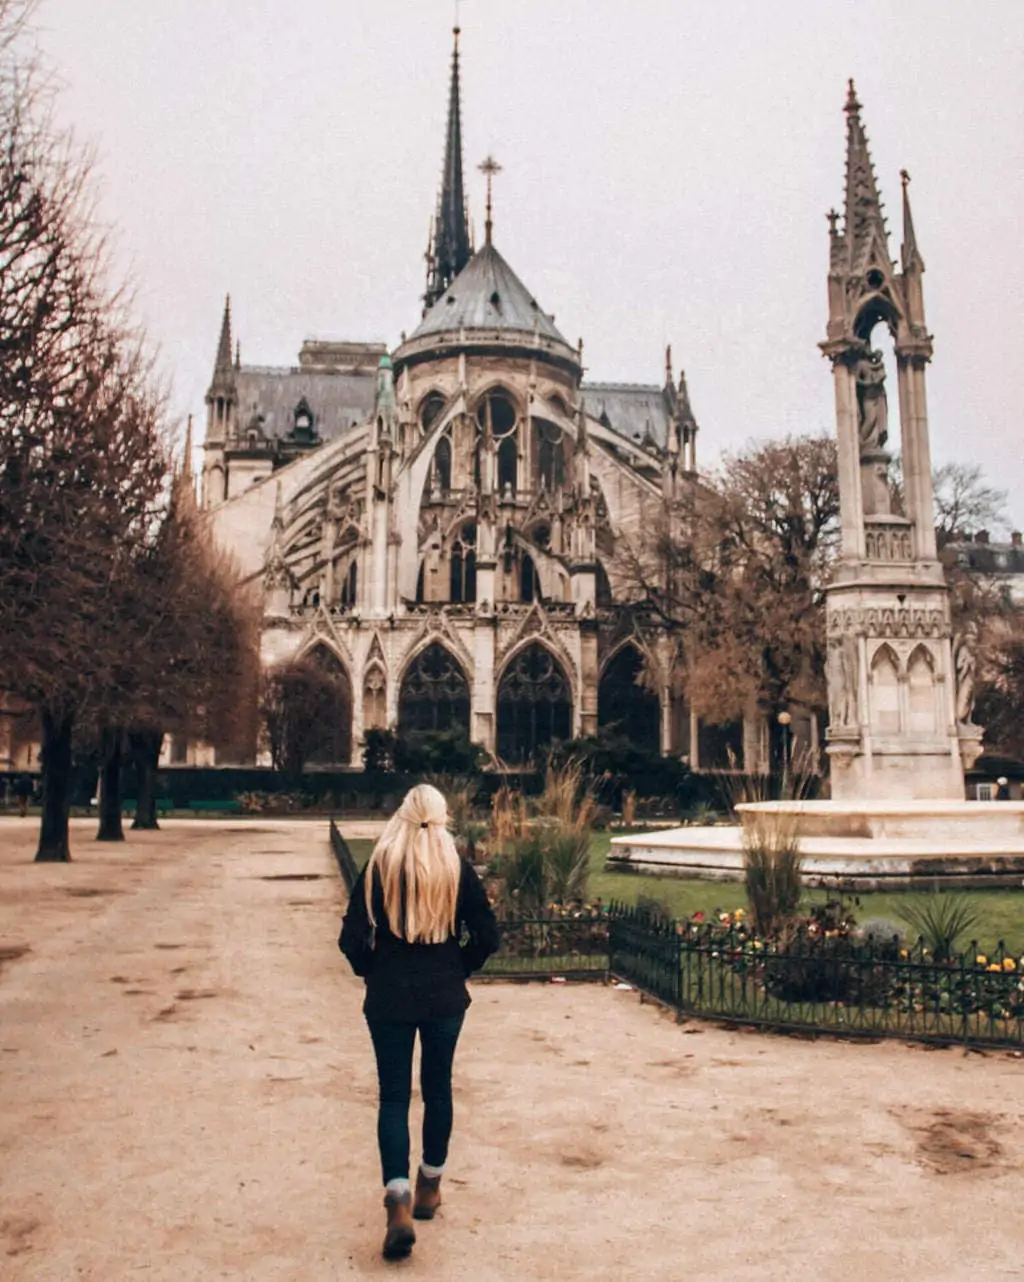 The back of Notre Dame features the flying buttresses. Get all the best Paris winter travel tip in this guide to New Year's in Paris.